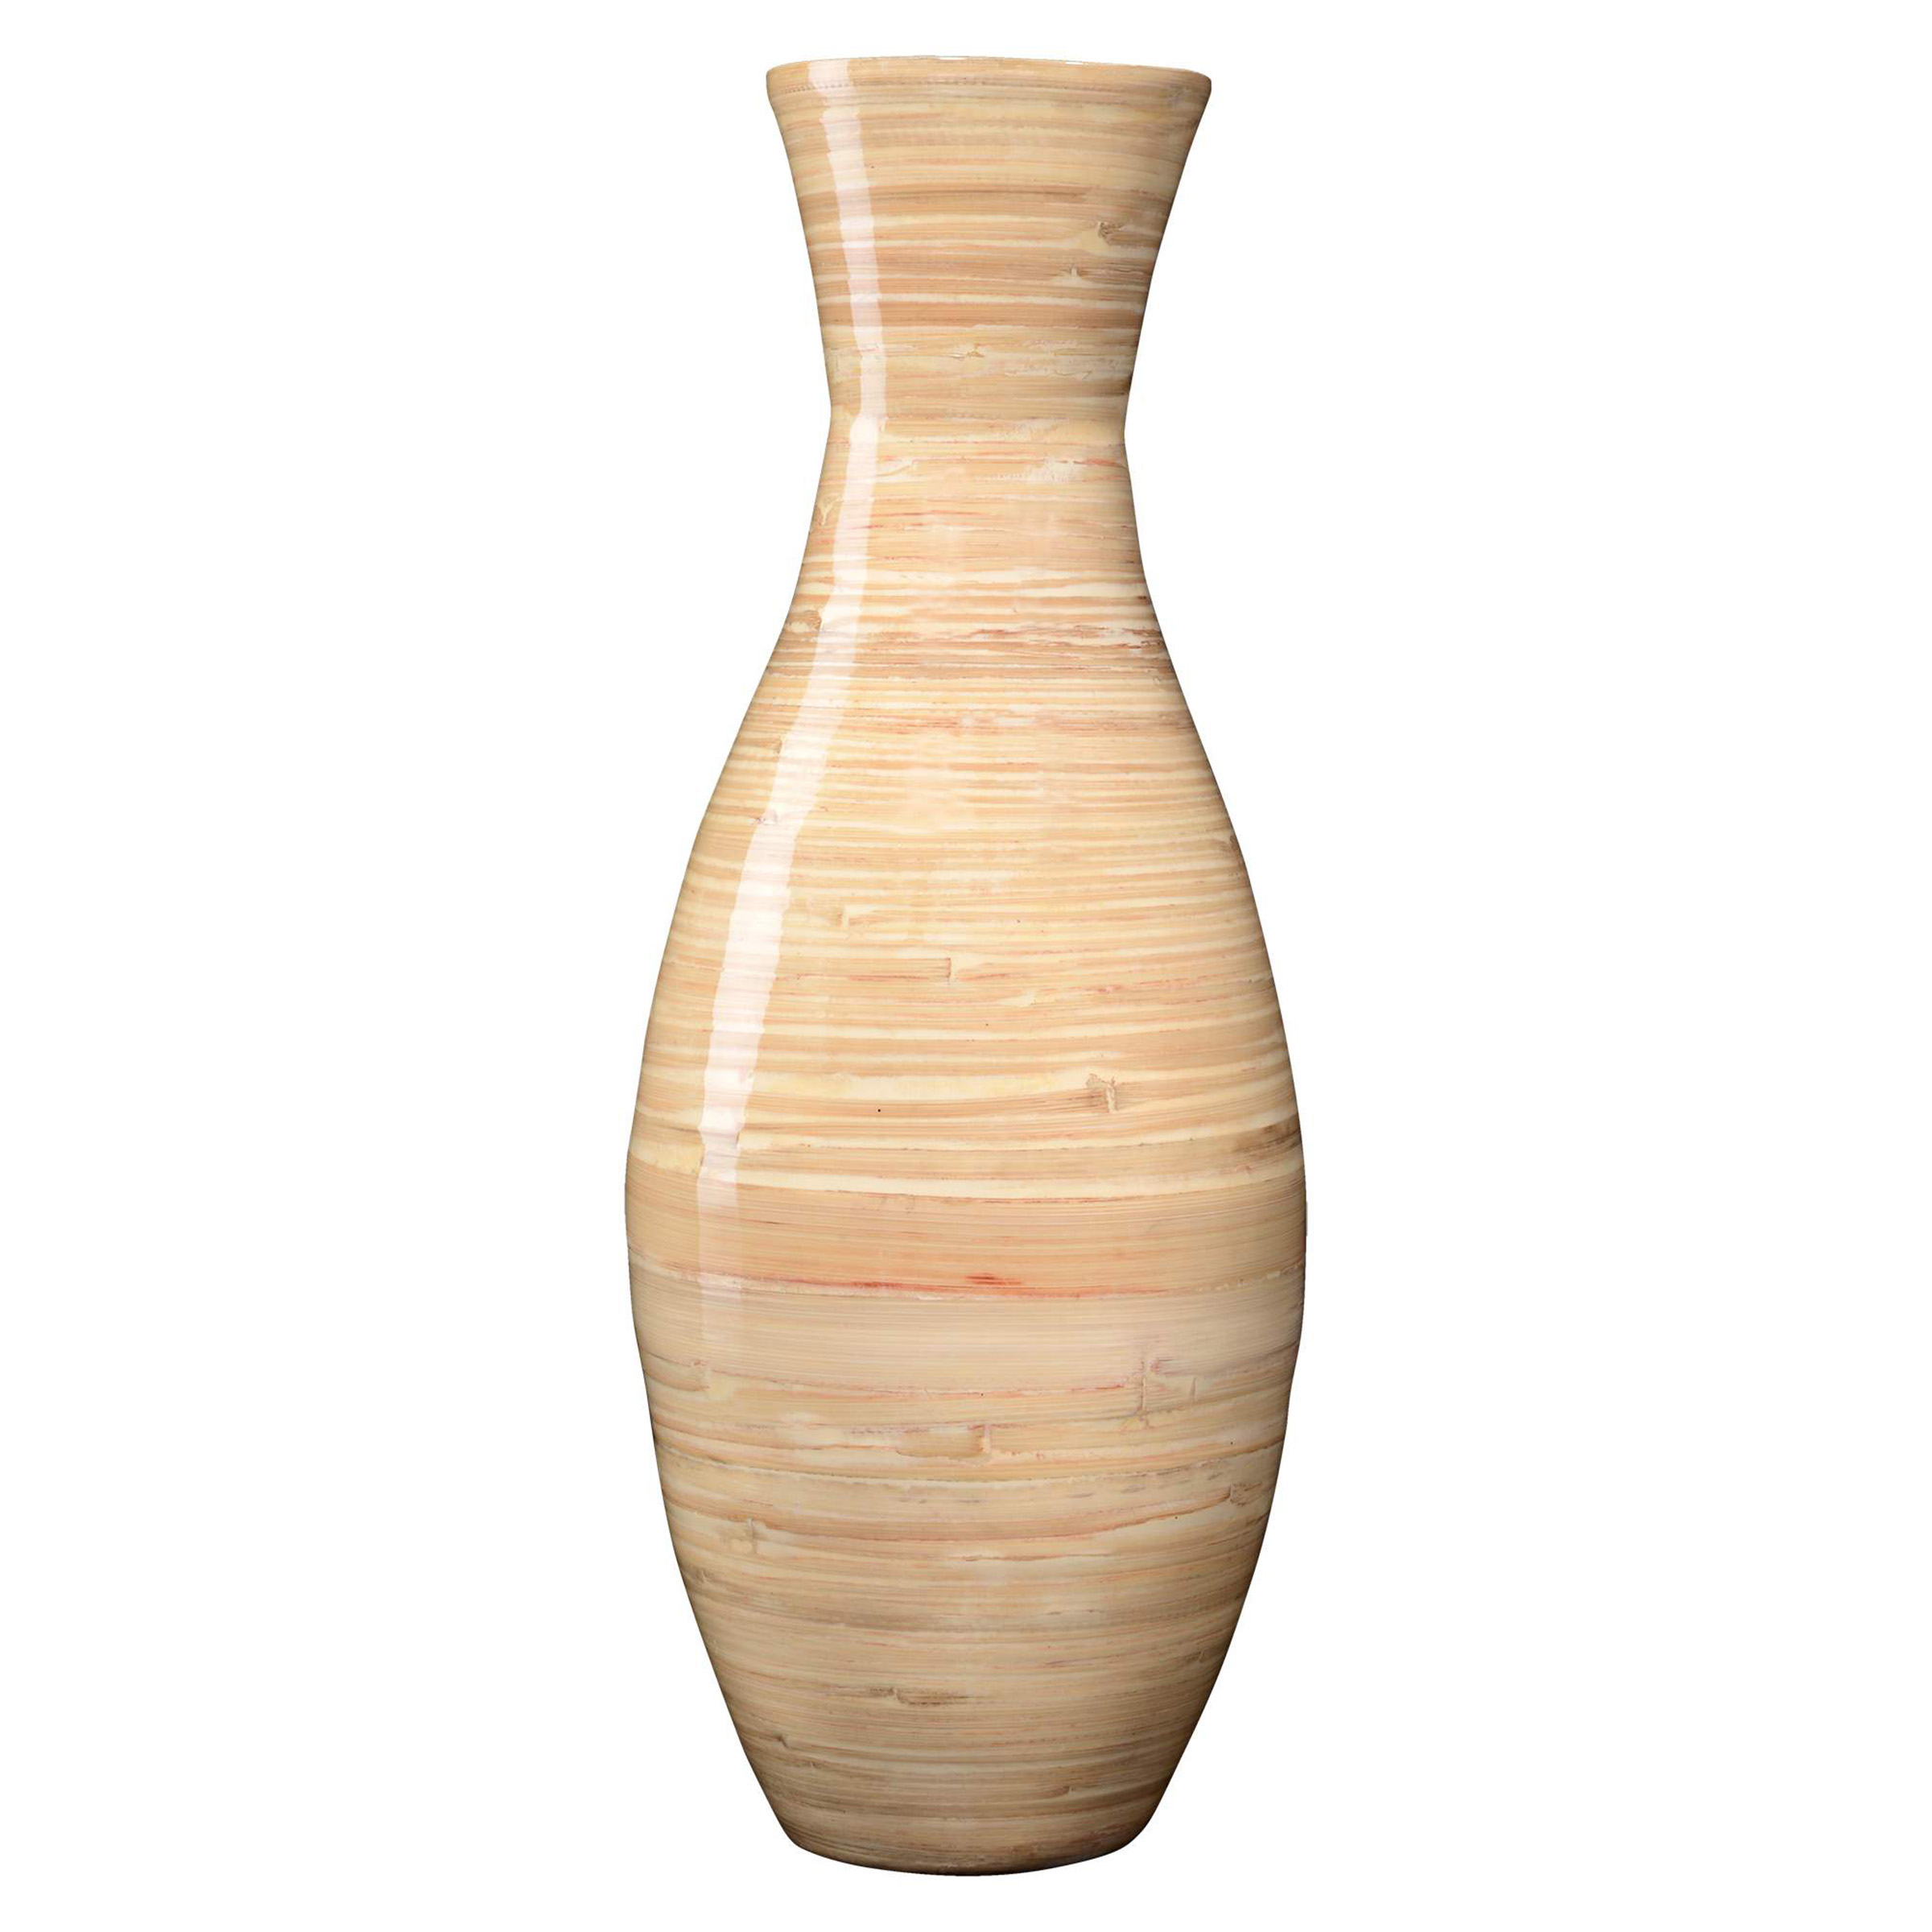 Villacera Handcrafted 20-Inch-Tall Sustainable Bamboo Floor Vase (Natural) - image 1 of 6